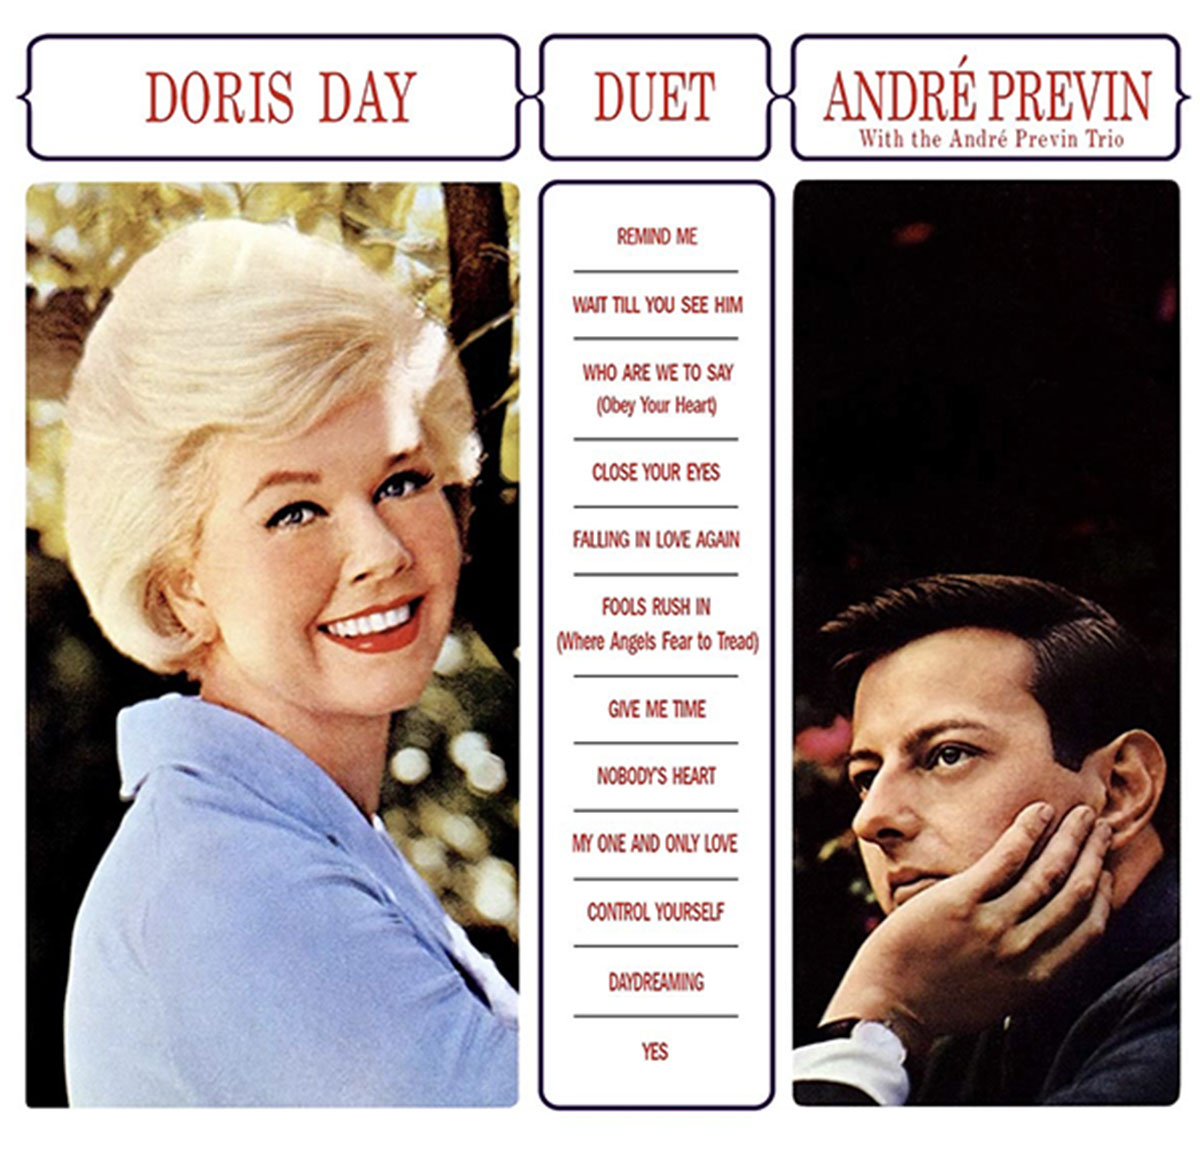 Doris Day and Andre Previn, Duet